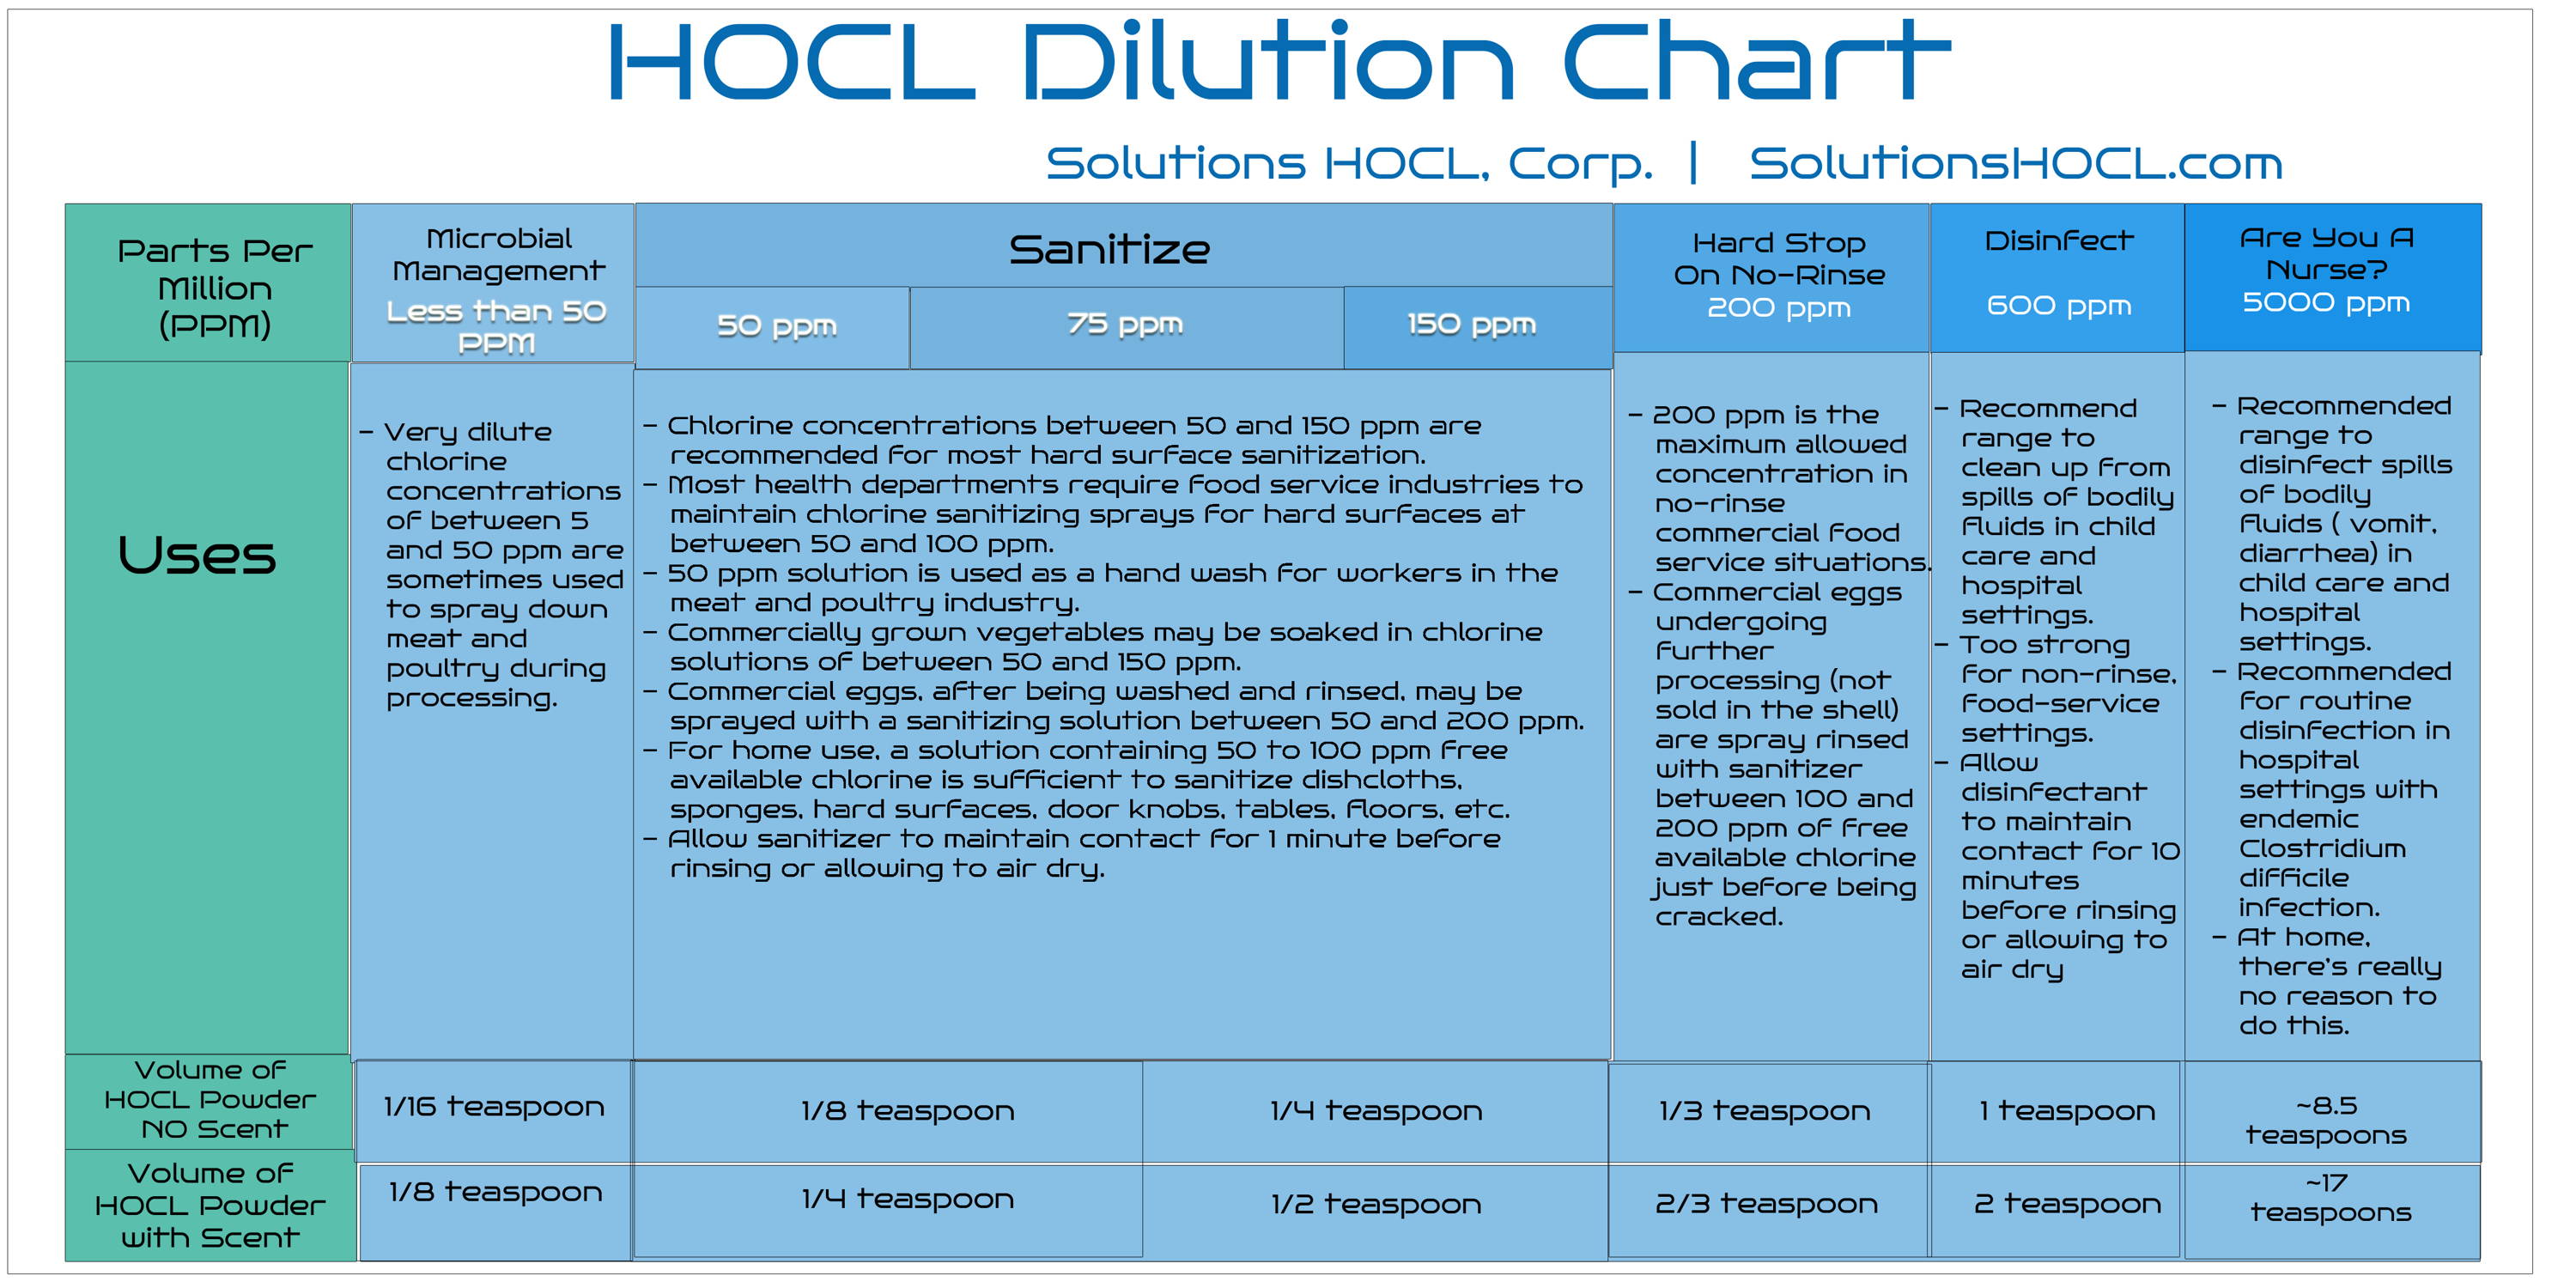 HOCL Dilution Chart